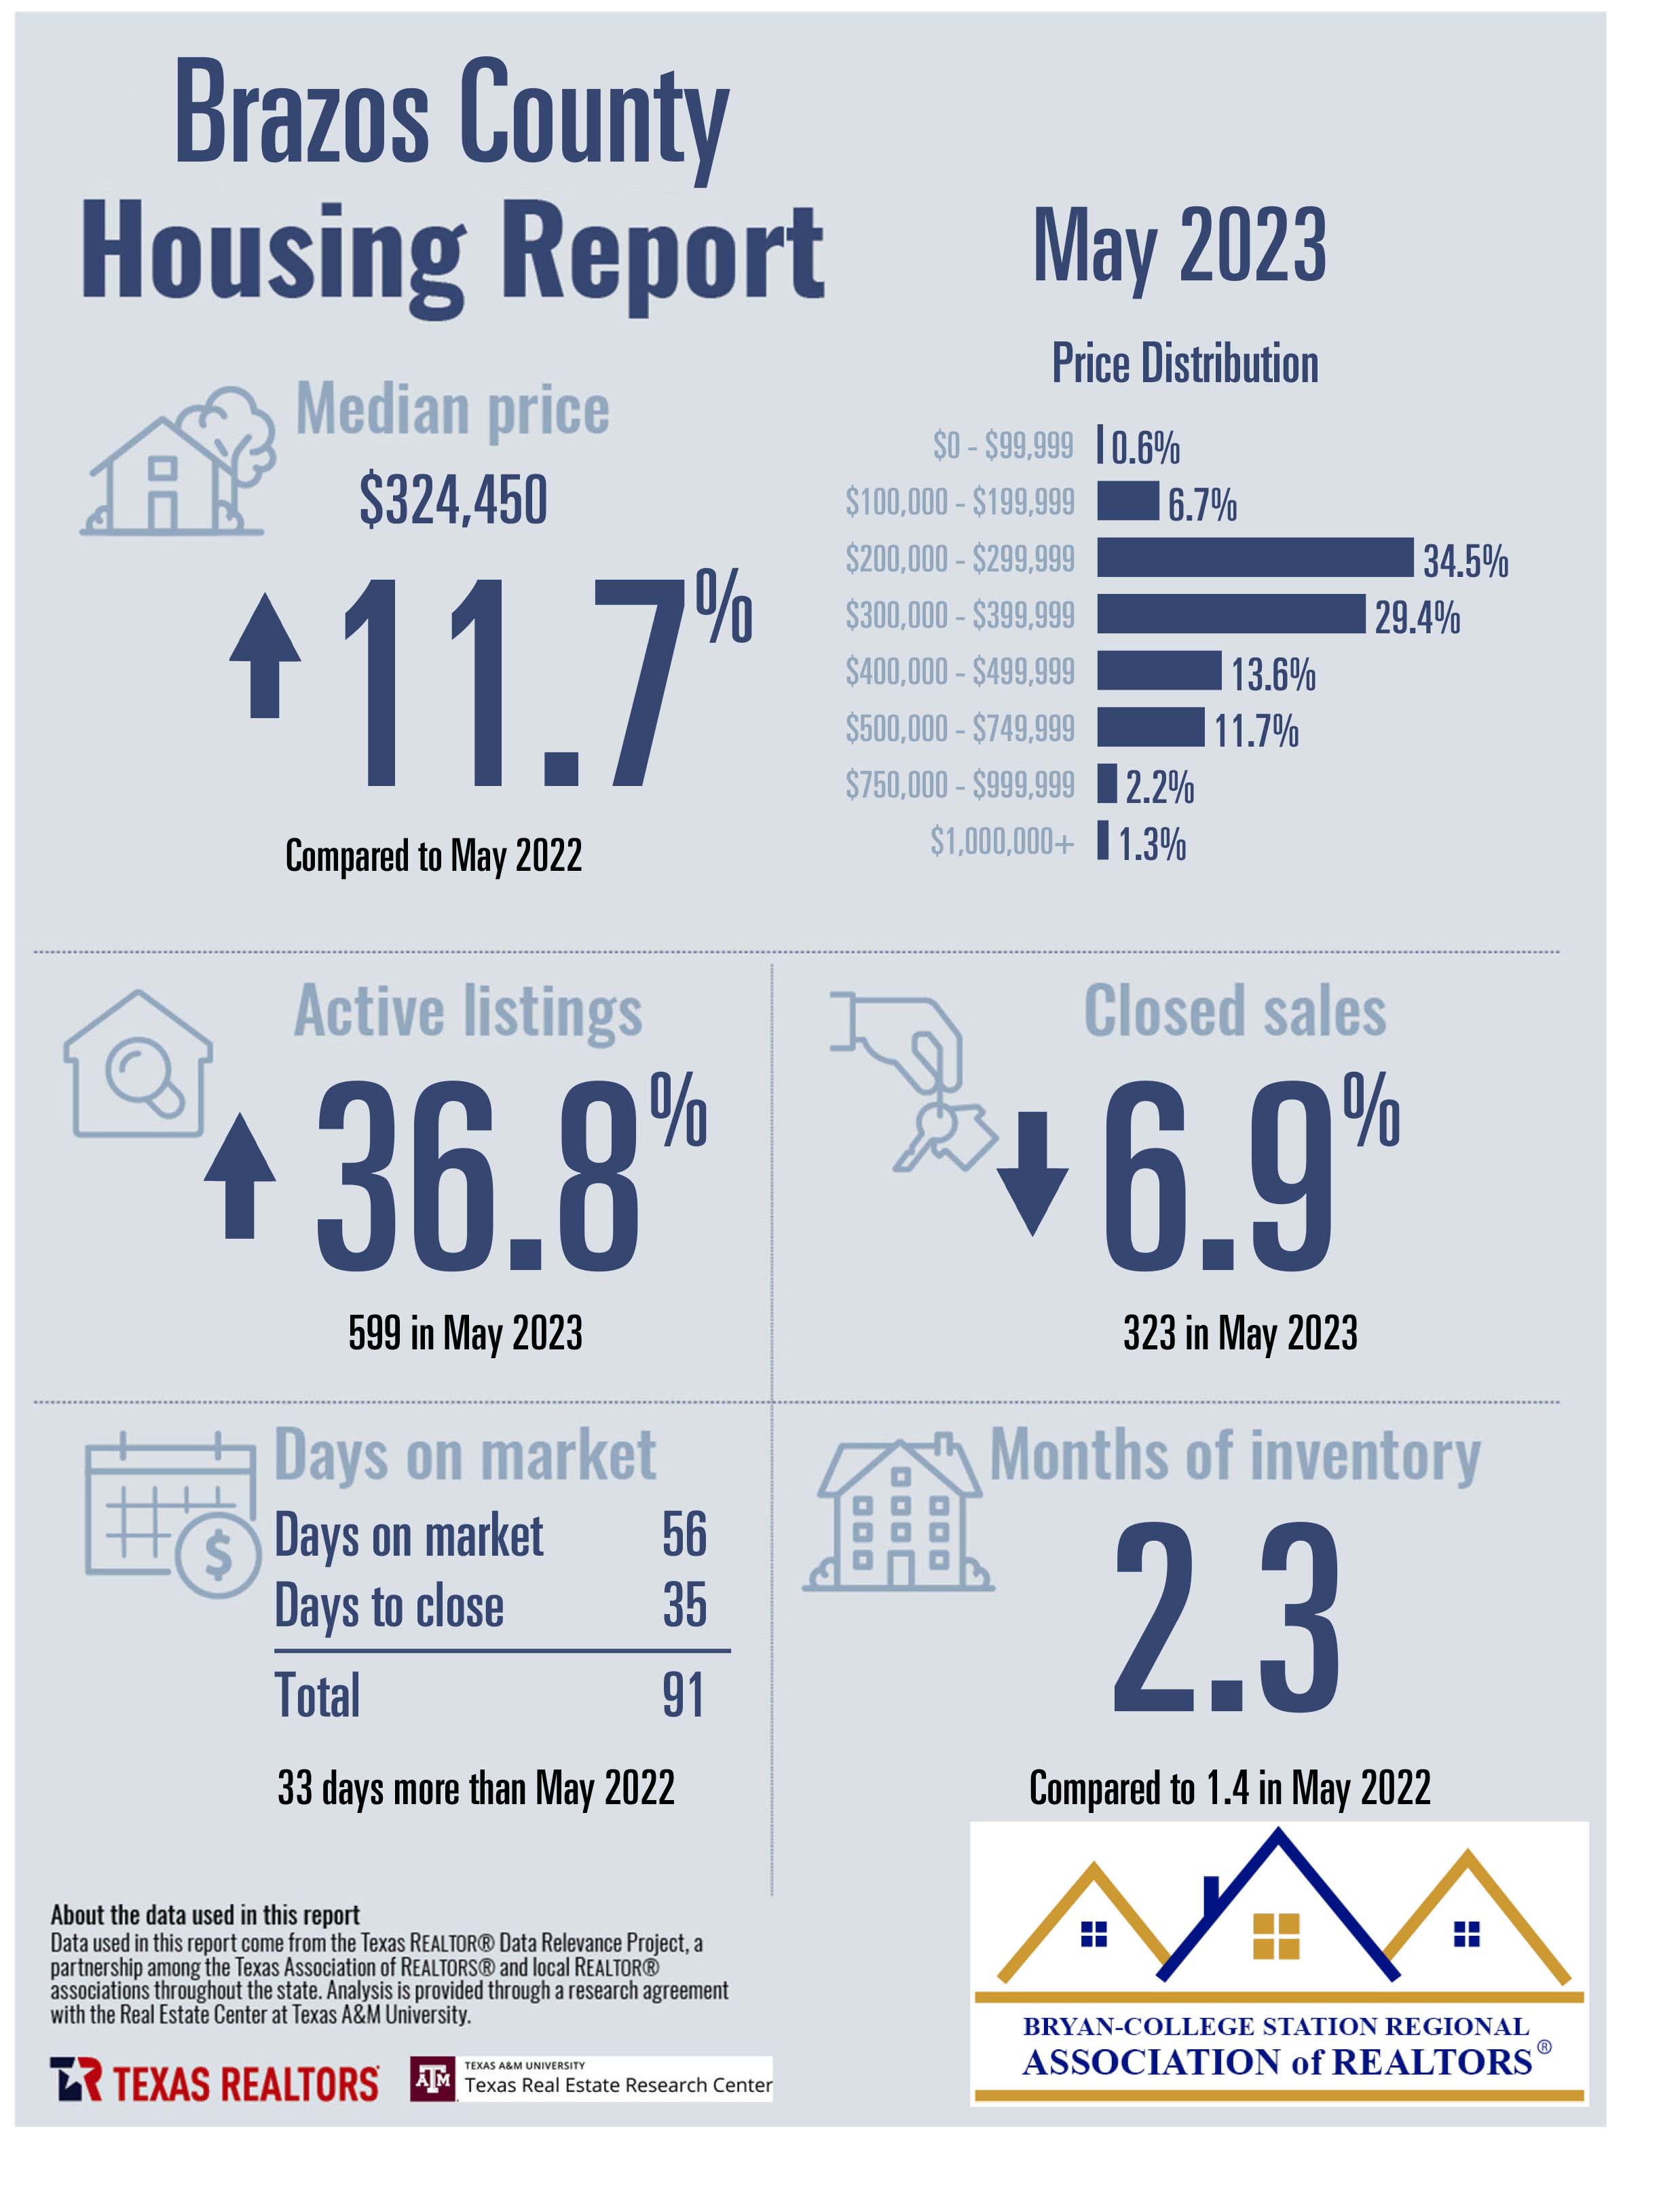 Residential Home Sale Report april may - Brazos